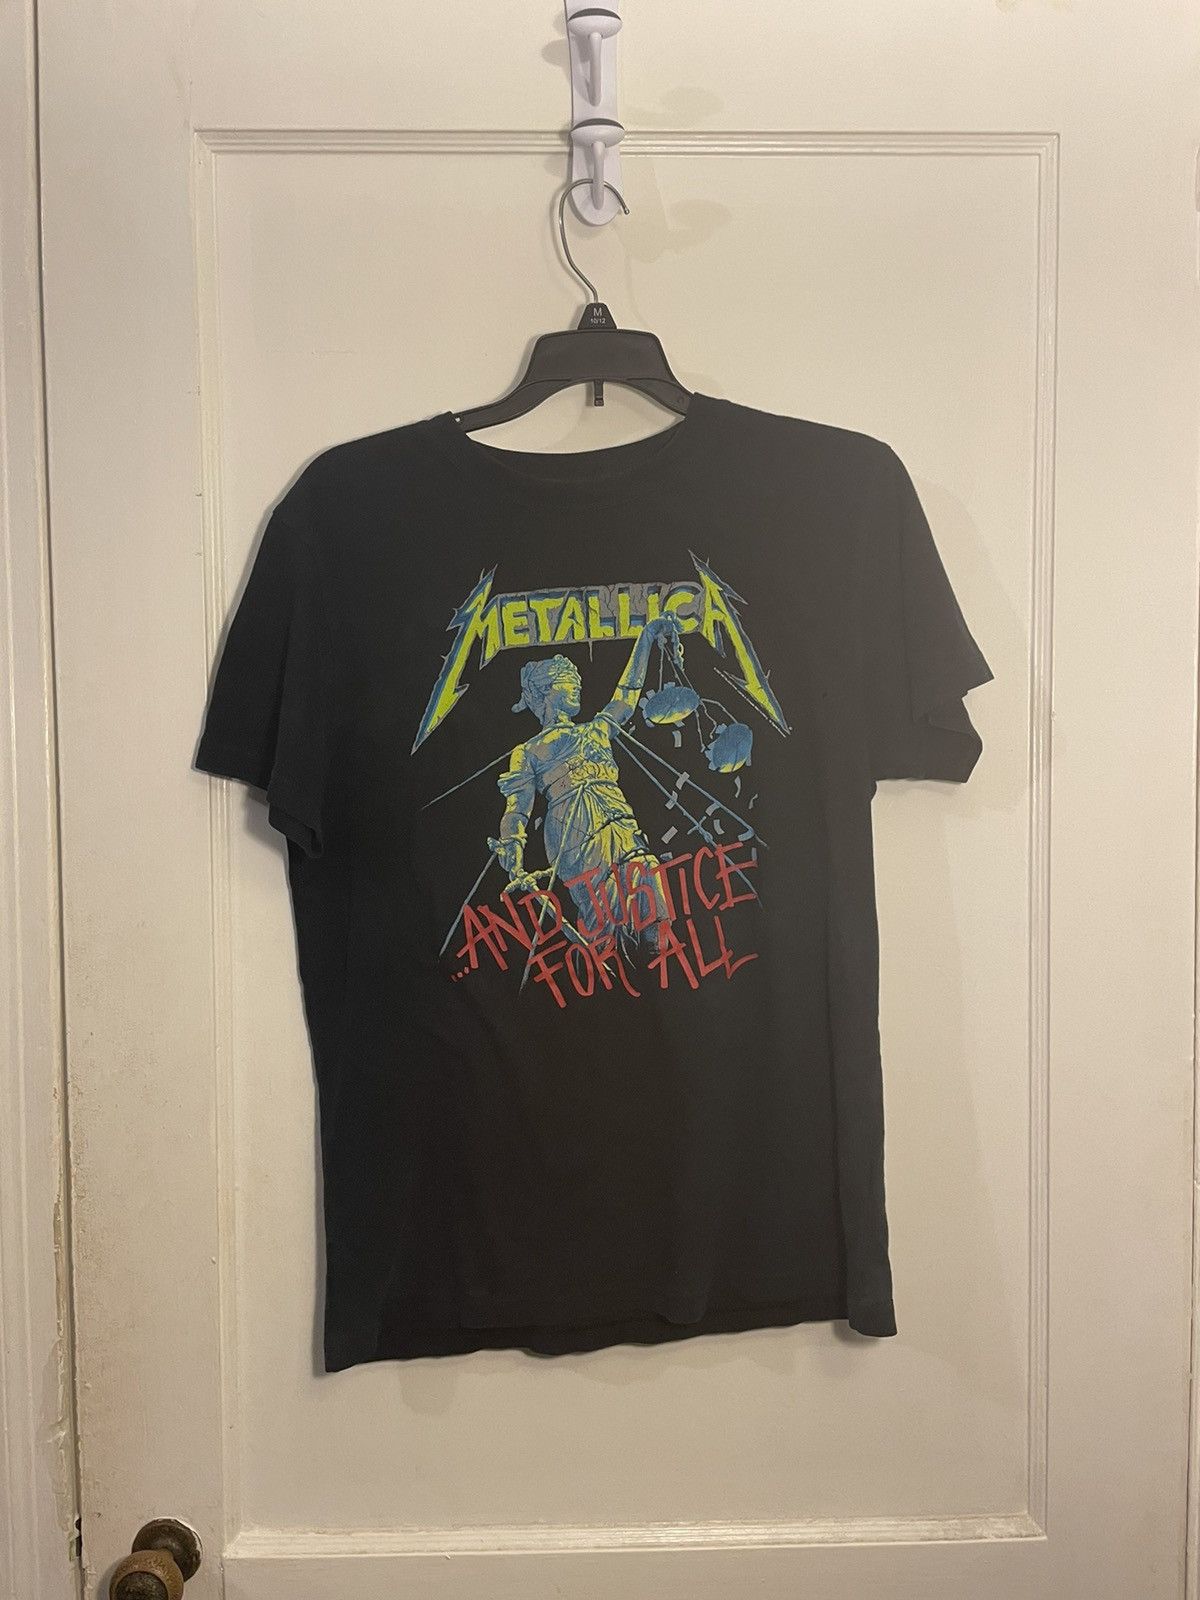 Vintage Men’s Small Black Metallica Graphic Band Tee Size US S / EU 44-46 / 1 - 1 Preview